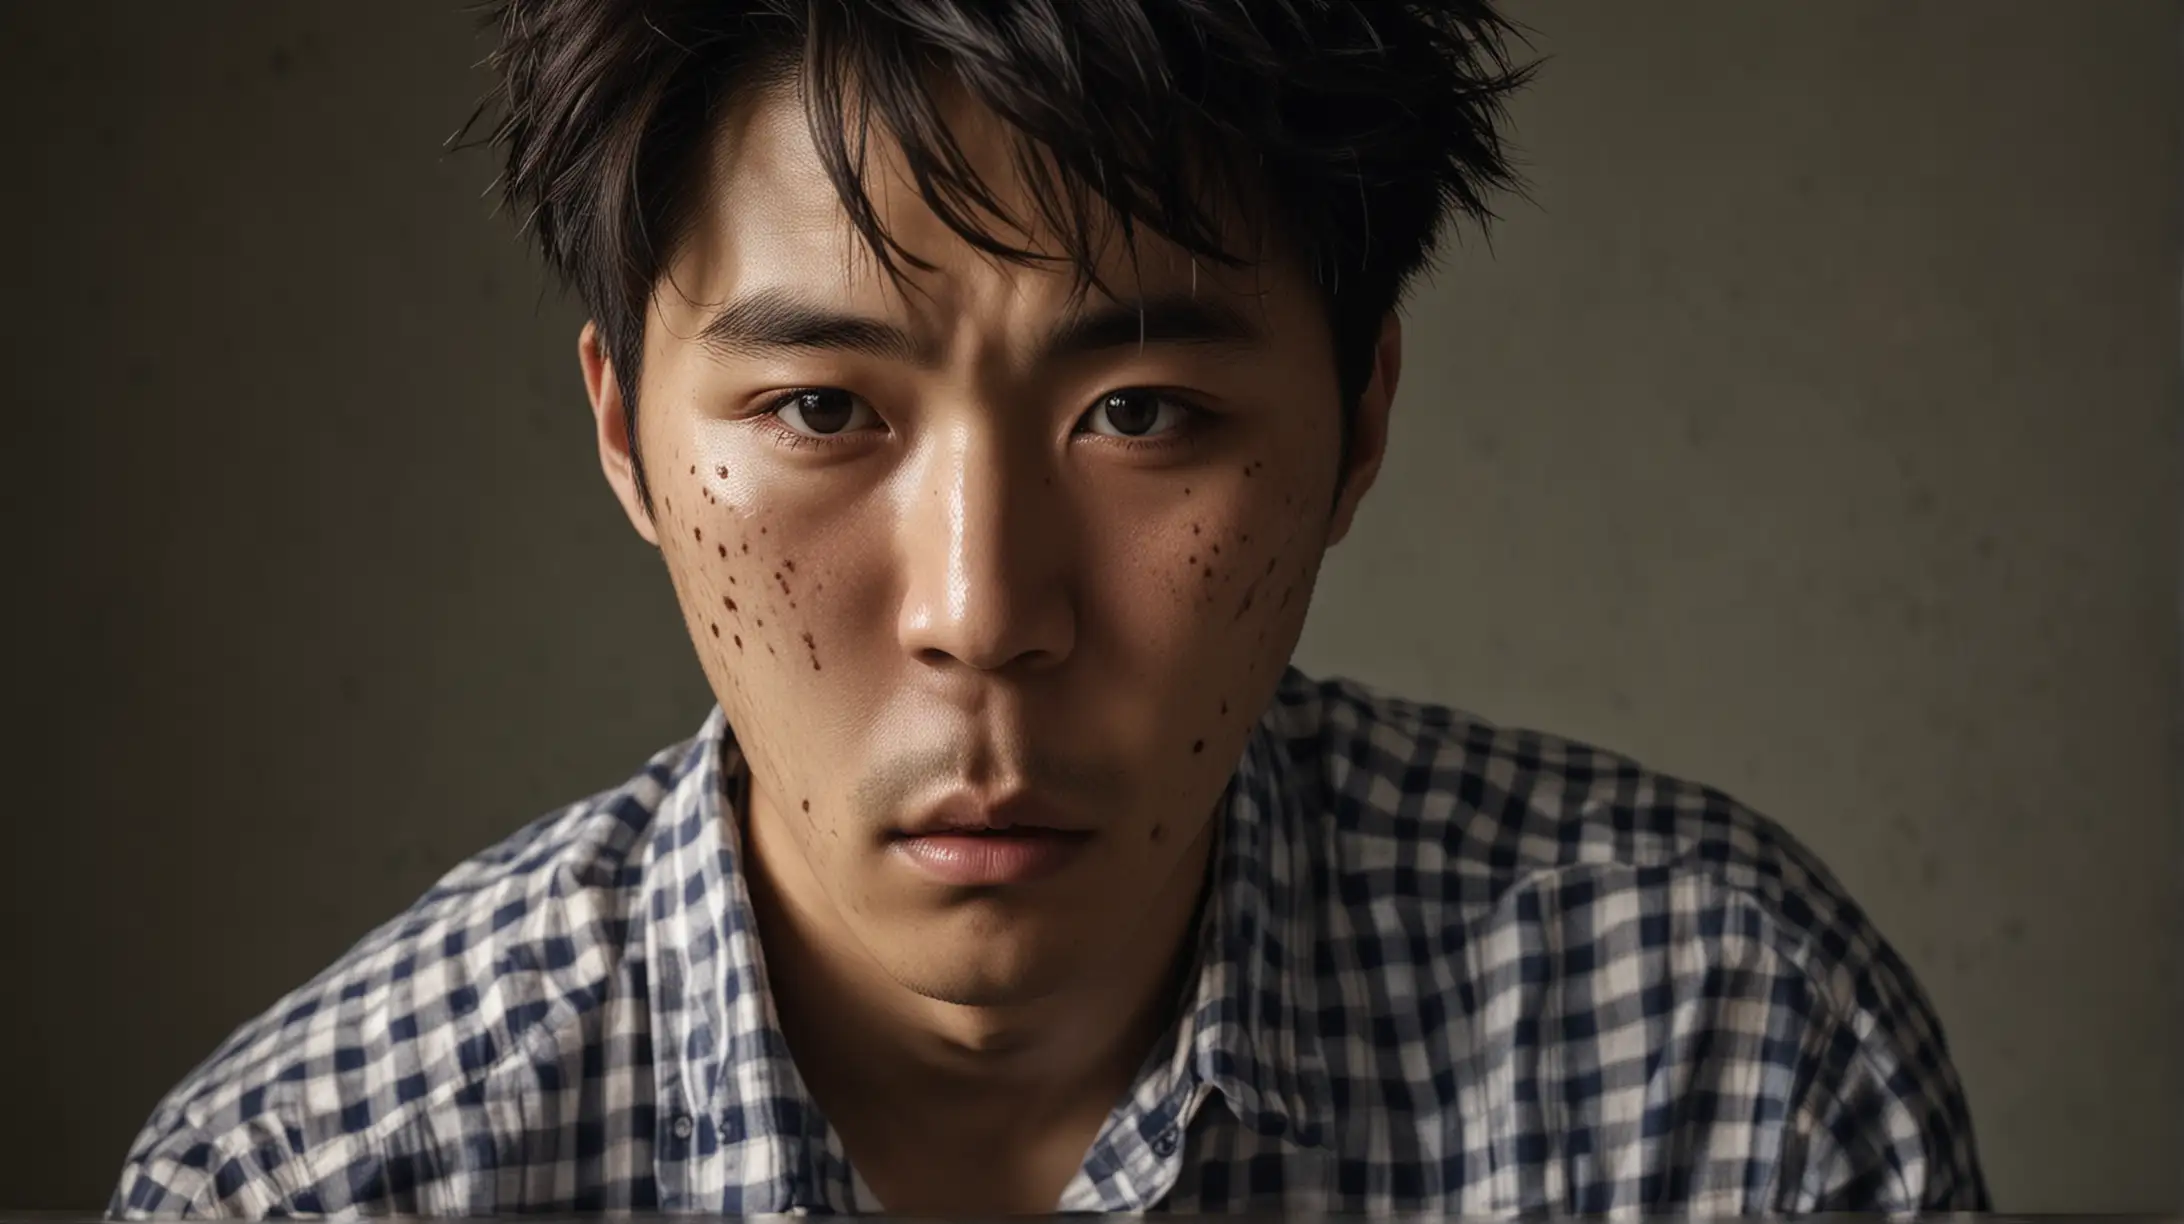 Classic portrait-style photography, korean guy, tired, young-looking, late 30's, checkered shirt, bruise on cheek, photo realistic, cinematic lighting